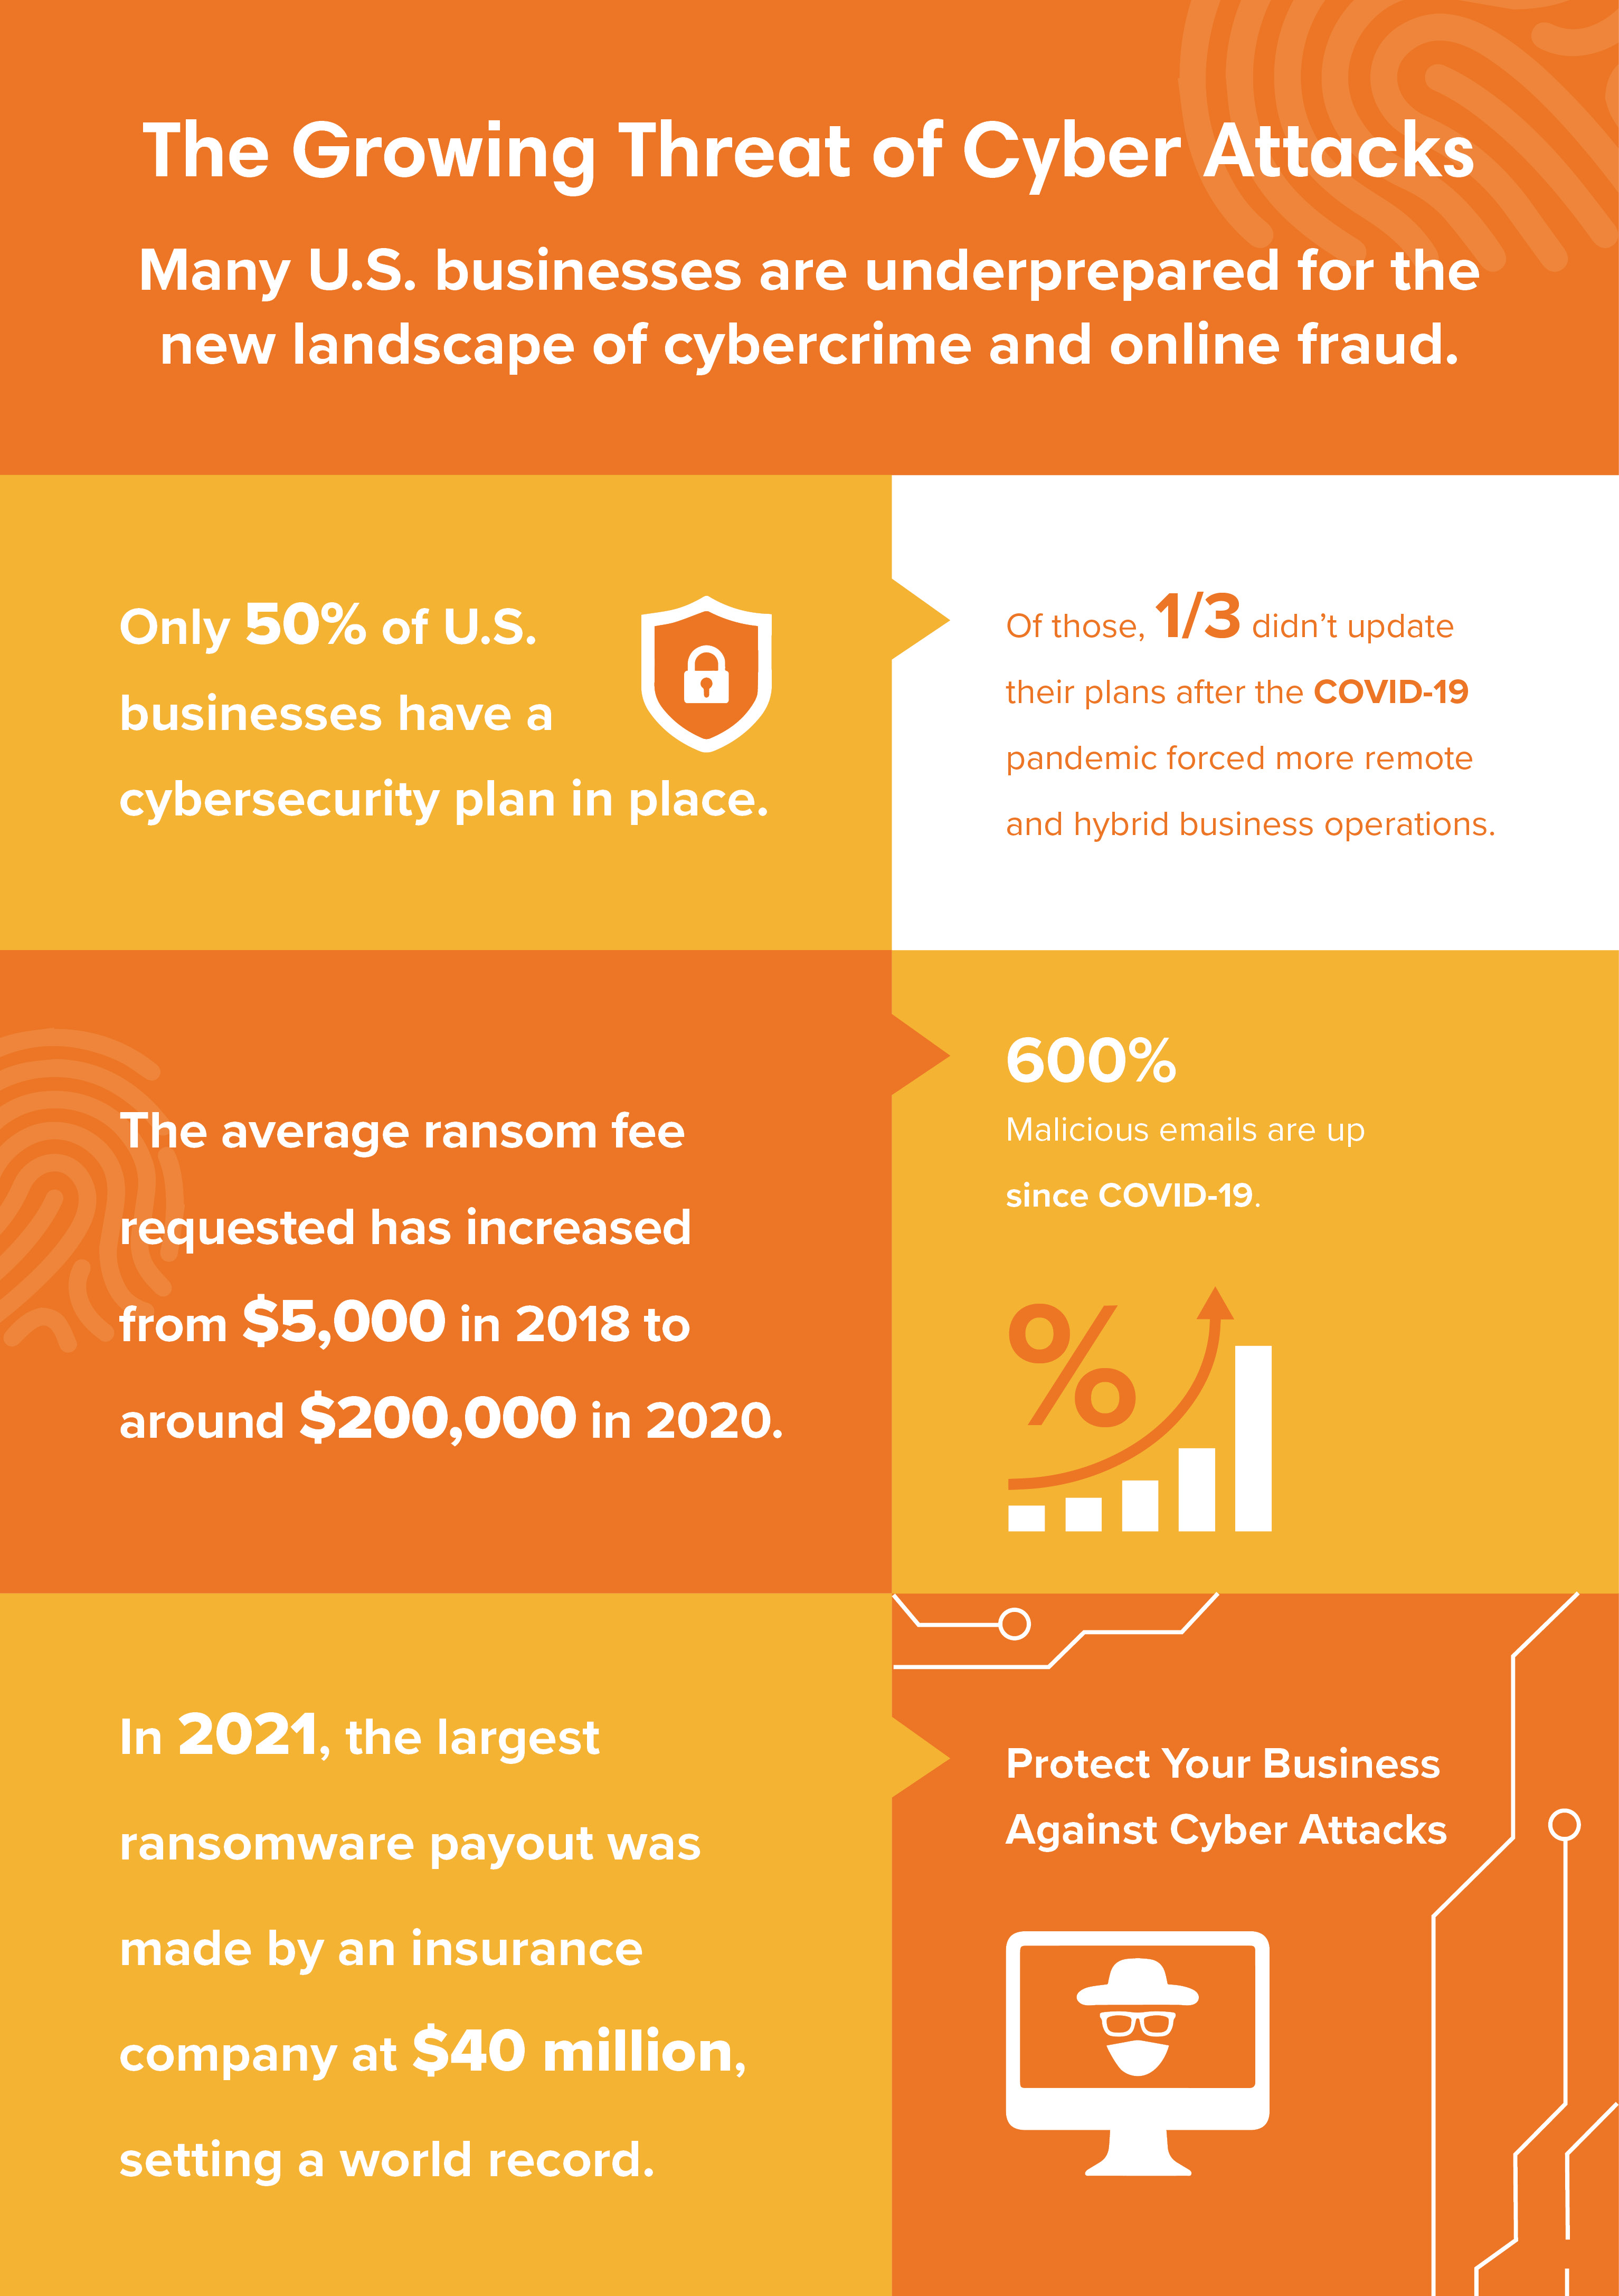 Protect Your Business Against Cyber Attacks Infographic